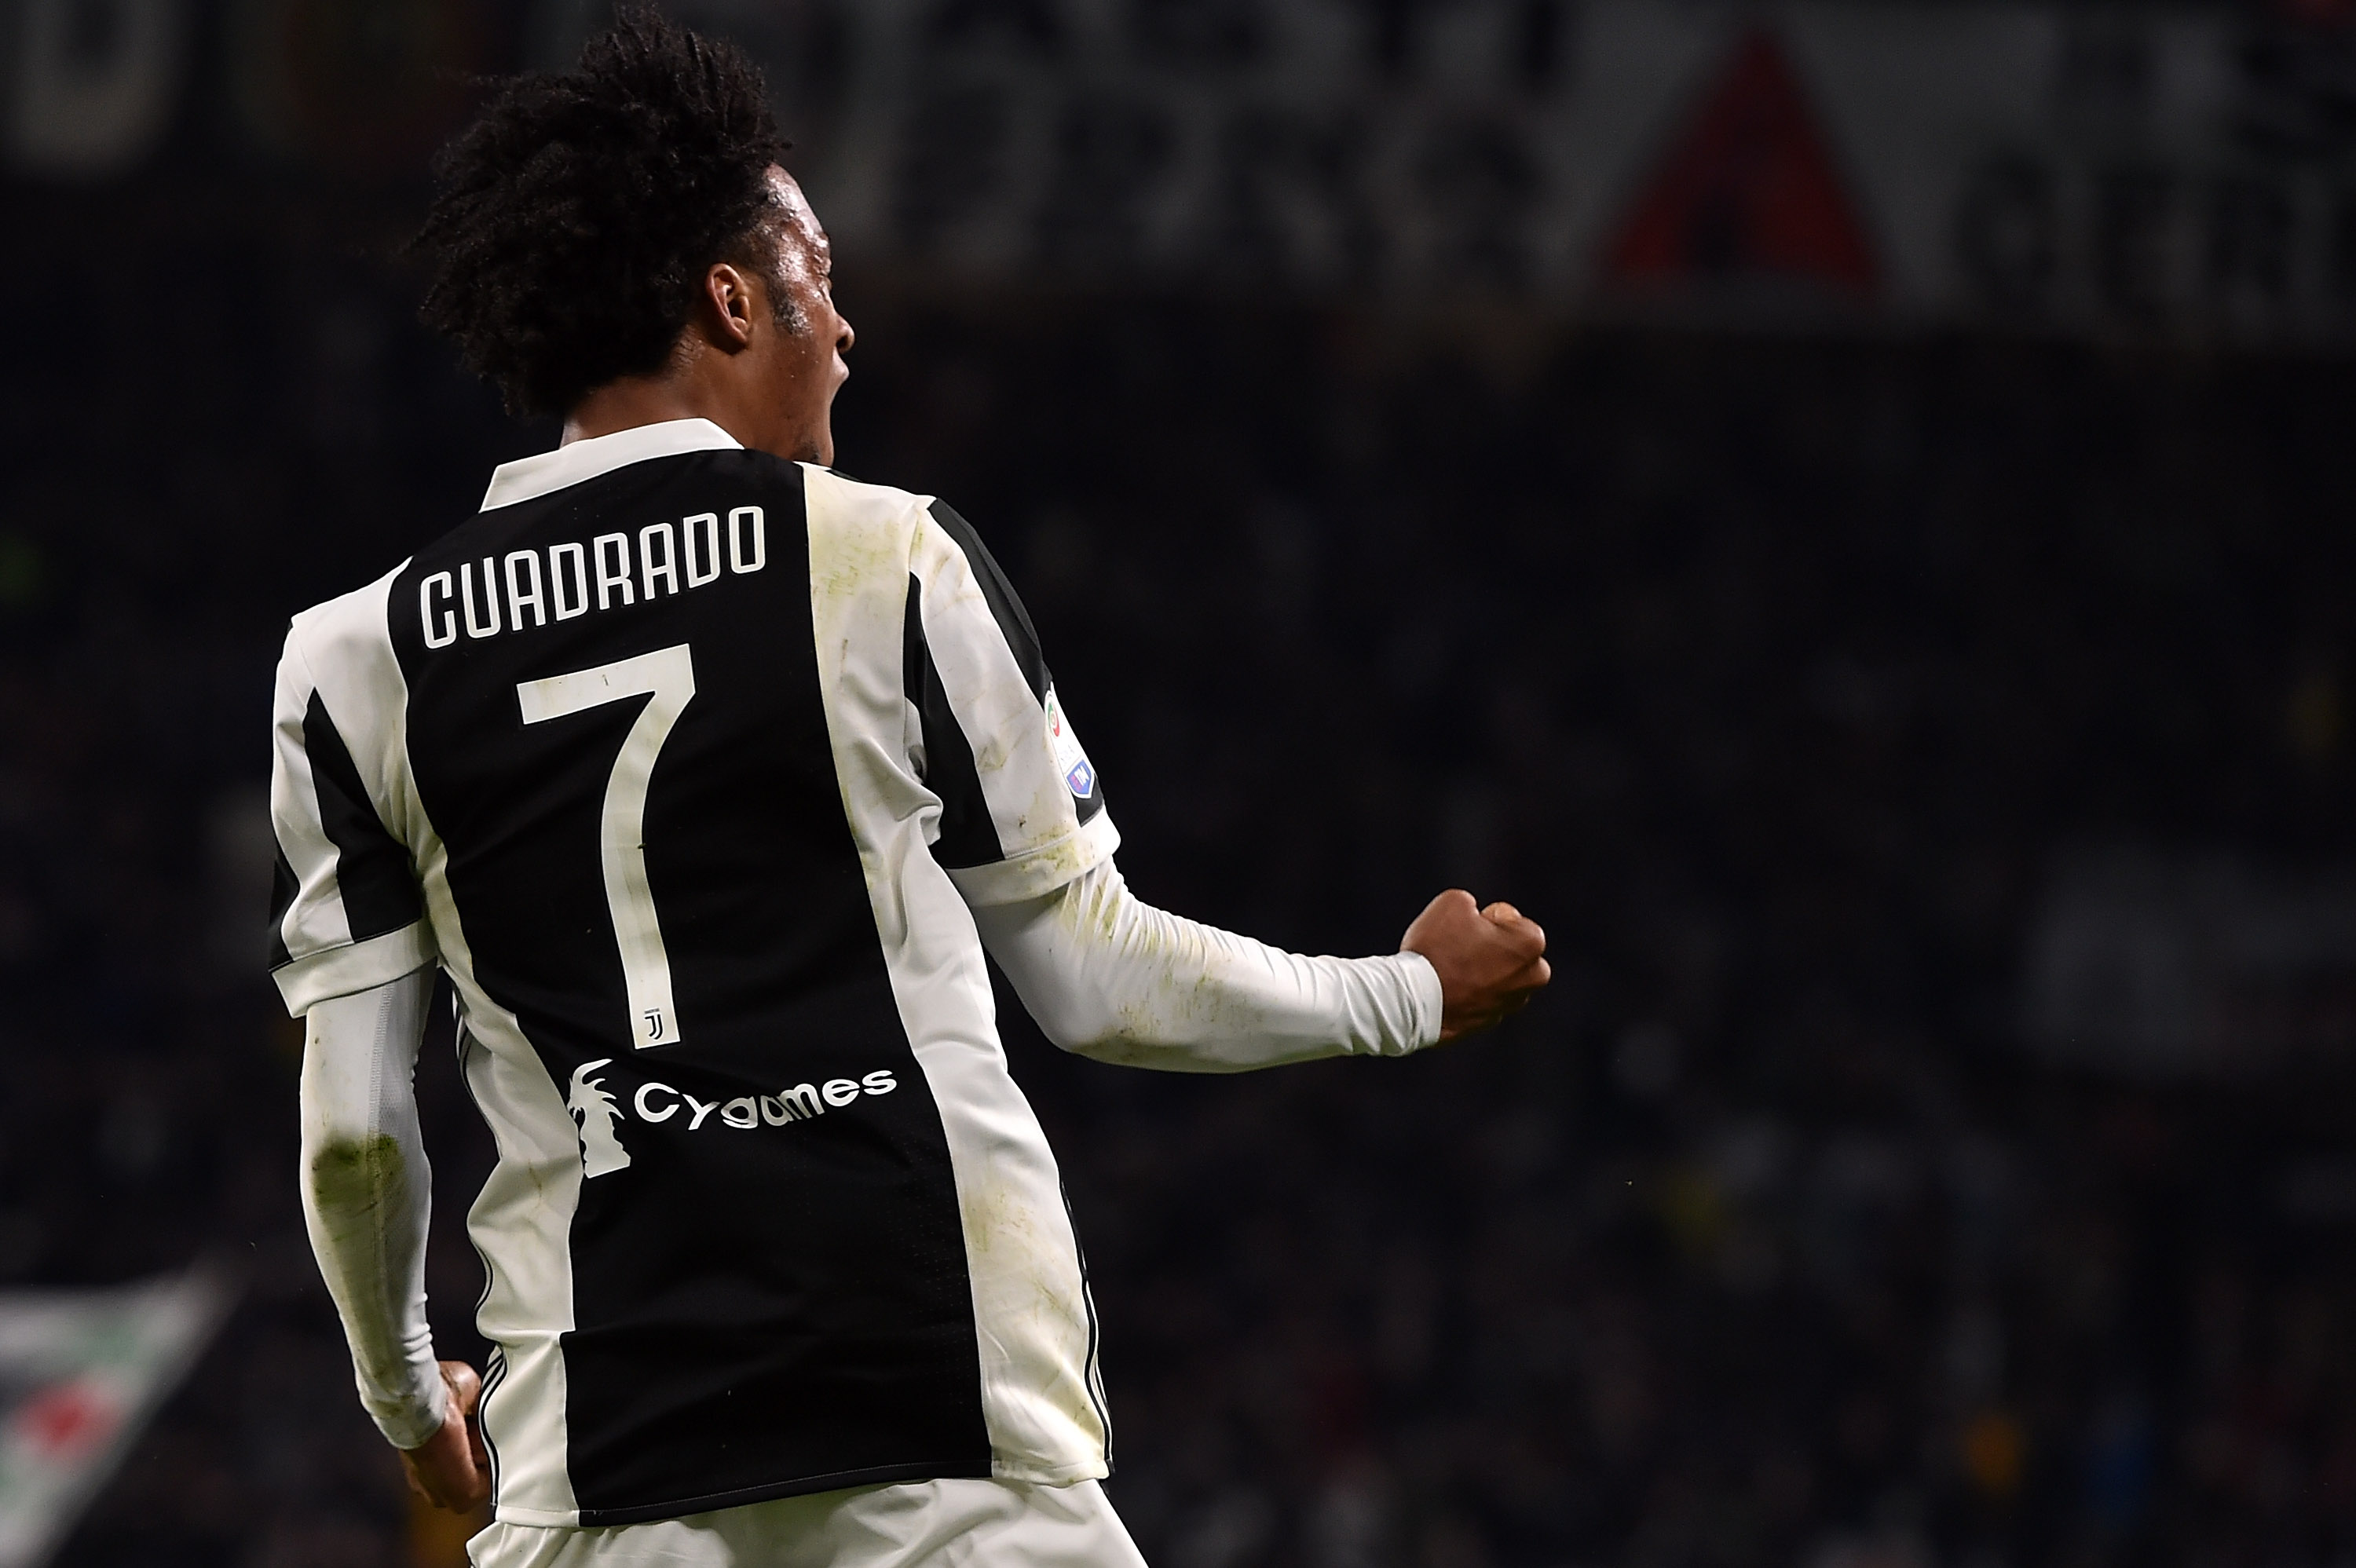  Video – On this day, Cuadrado’s header earned Juventus hard-fought win against Sampdoria